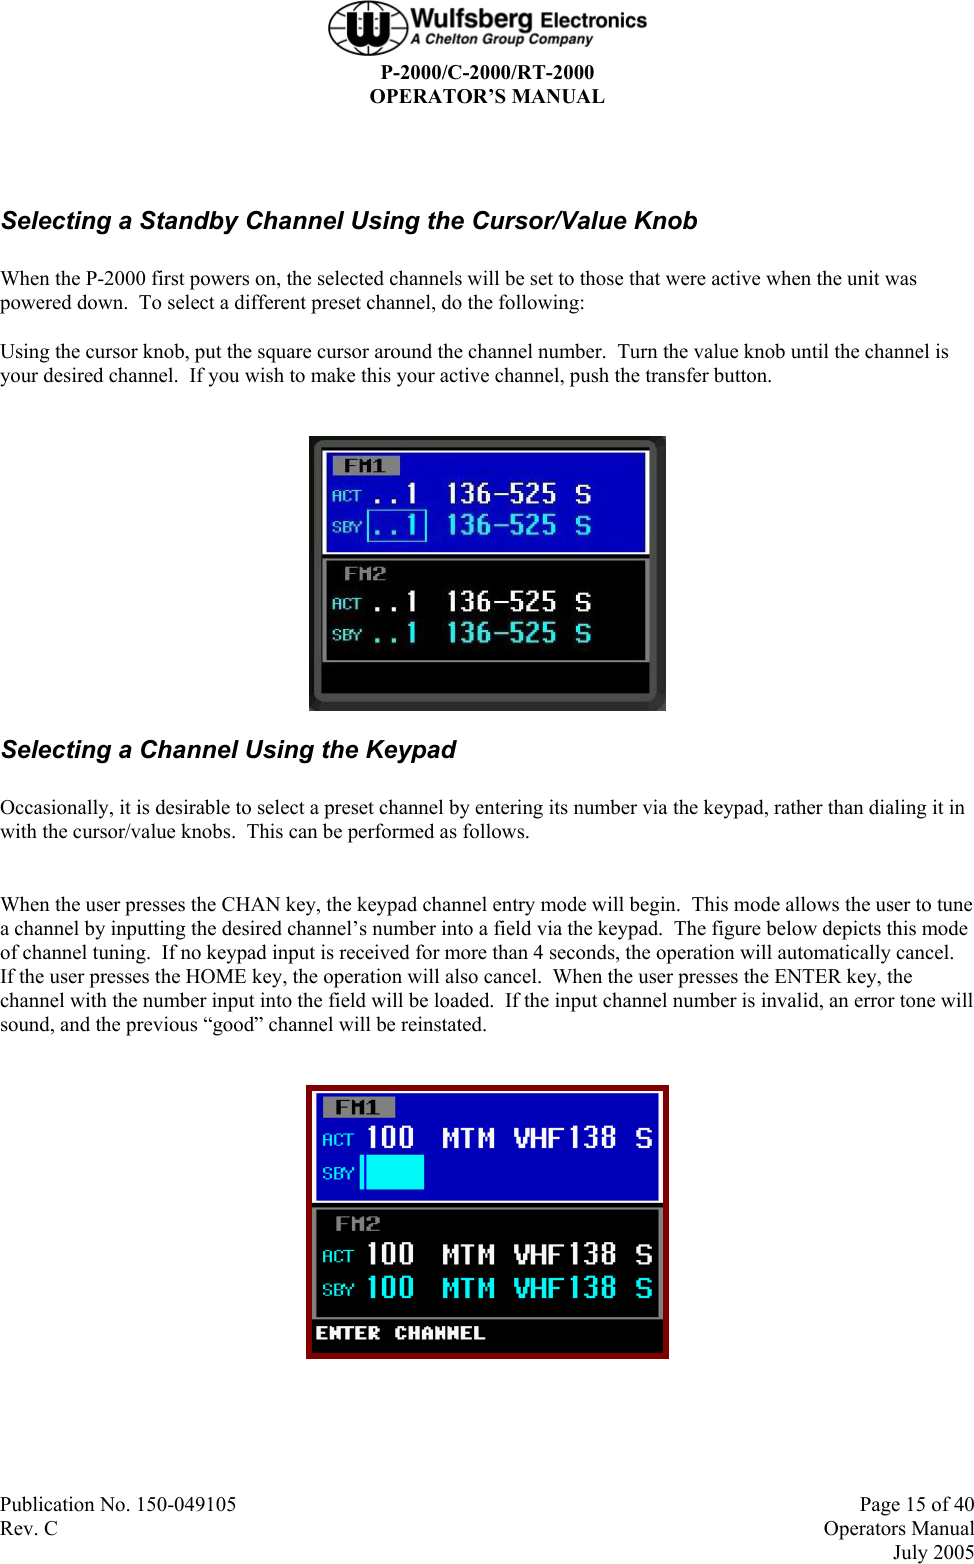  P-2000/C-2000/RT-2000 OPERATOR’S MANUAL  Publication No. 150-049105  Page 15 of 40 Rev. C  Operators Manual  July 2005  Selecting a Standby Channel Using the Cursor/Value Knob When the P-2000 first powers on, the selected channels will be set to those that were active when the unit was powered down.  To select a different preset channel, do the following: Using the cursor knob, put the square cursor around the channel number.  Turn the value knob until the channel is your desired channel.  If you wish to make this your active channel, push the transfer button.   Selecting a Channel Using the Keypad Occasionally, it is desirable to select a preset channel by entering its number via the keypad, rather than dialing it in with the cursor/value knobs.  This can be performed as follows.  When the user presses the CHAN key, the keypad channel entry mode will begin.  This mode allows the user to tune a channel by inputting the desired channel’s number into a field via the keypad.  The figure below depicts this mode of channel tuning.  If no keypad input is received for more than 4 seconds, the operation will automatically cancel.  If the user presses the HOME key, the operation will also cancel.  When the user presses the ENTER key, the channel with the number input into the field will be loaded.  If the input channel number is invalid, an error tone will sound, and the previous “good” channel will be reinstated.    